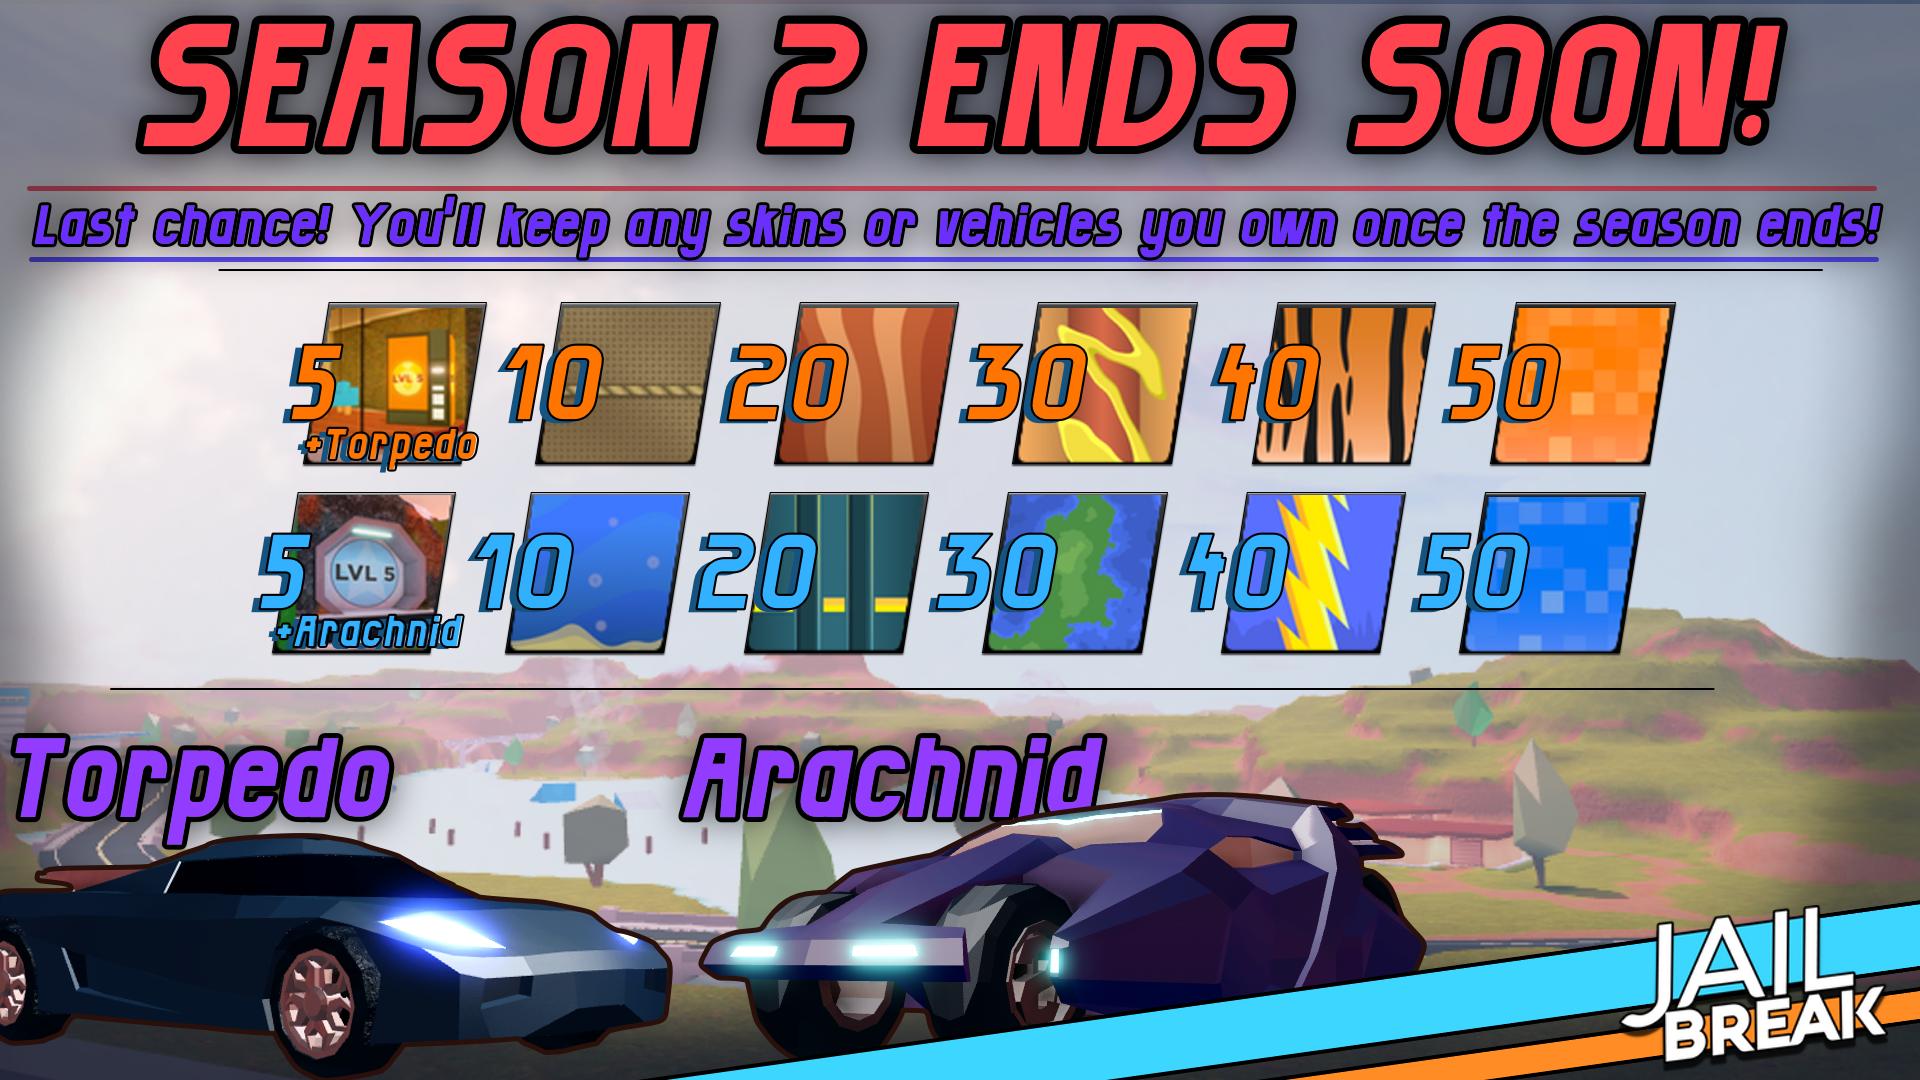 Badimo On Twitter Summer Is Here Next Week And So Is The Summer Season Of Jailbreak This Is Your Last Chance For Season 2 Items You Will Keep Any Skins - roblox jailbreak arachnid car